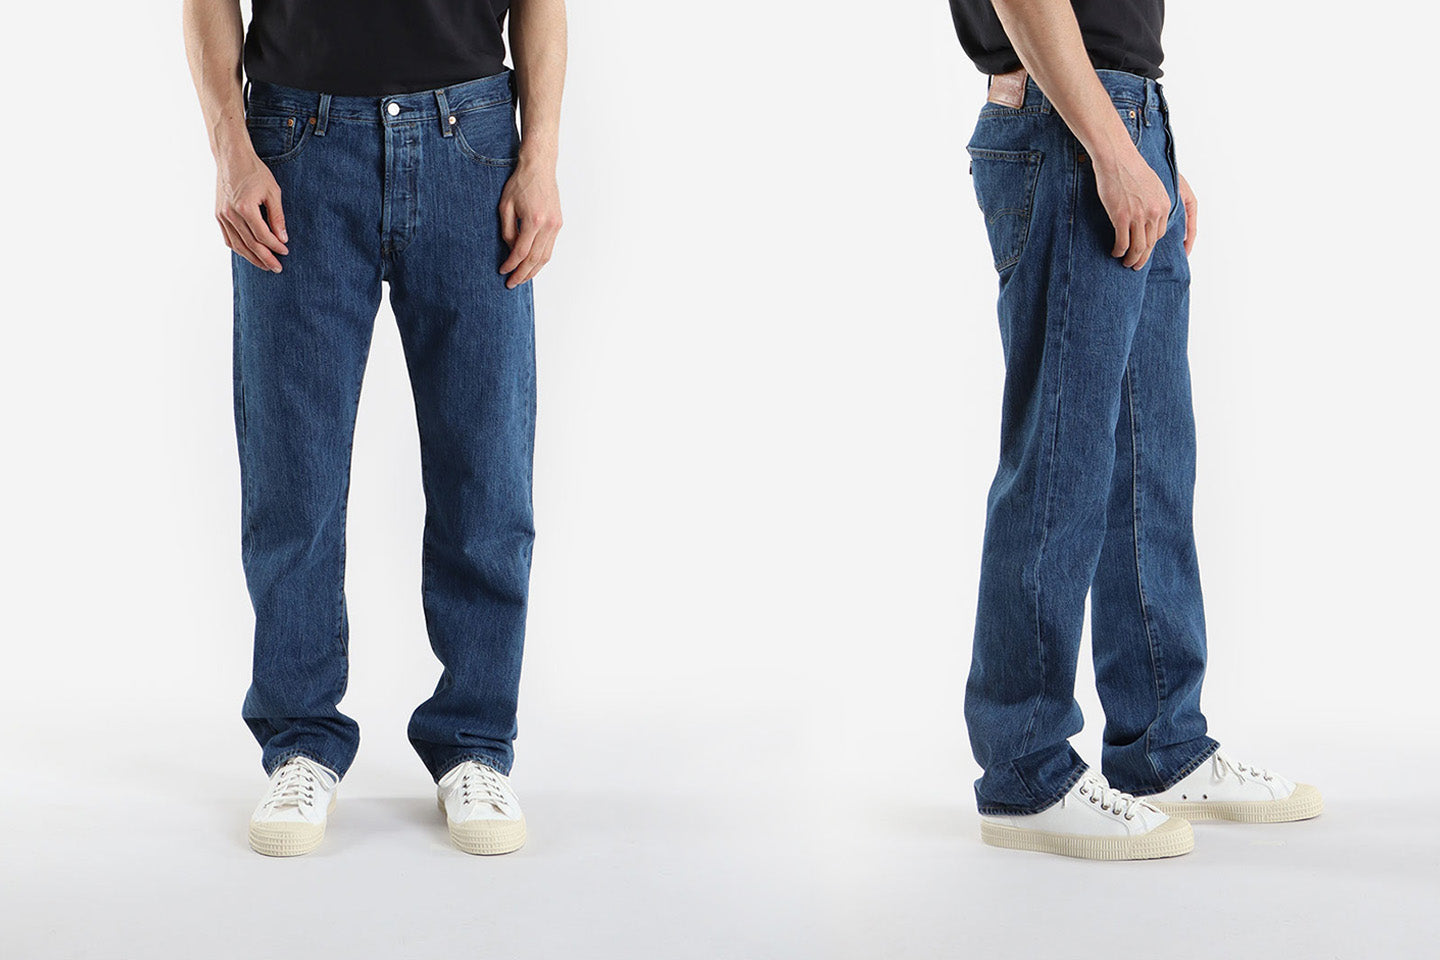 Levi’s Fit Guide | How do Levi’s Jeans Fit?